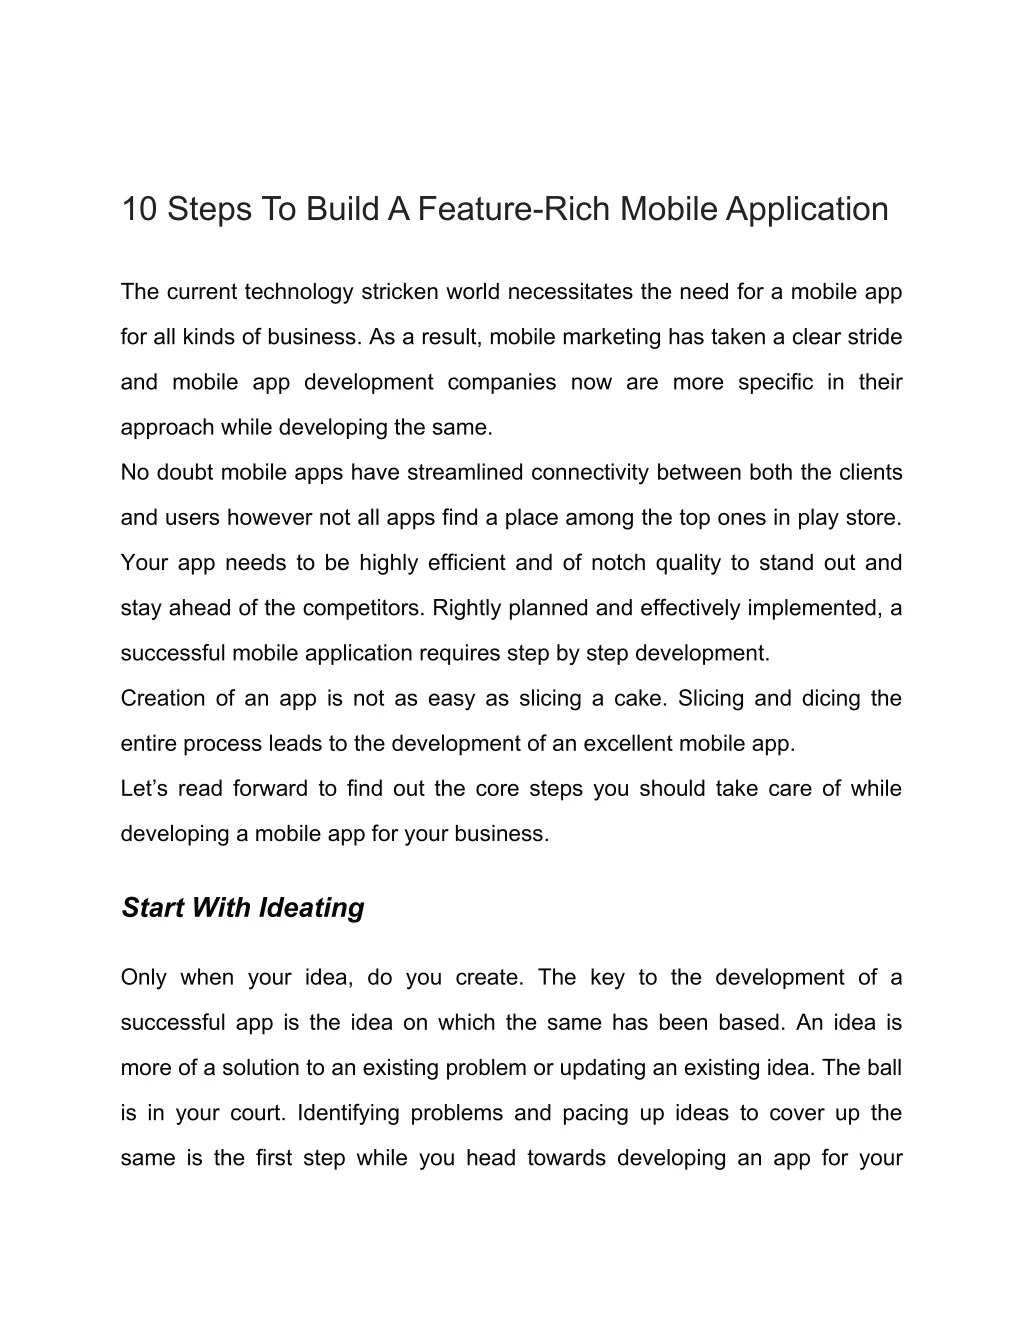 10 steps to build a feature rich mobile